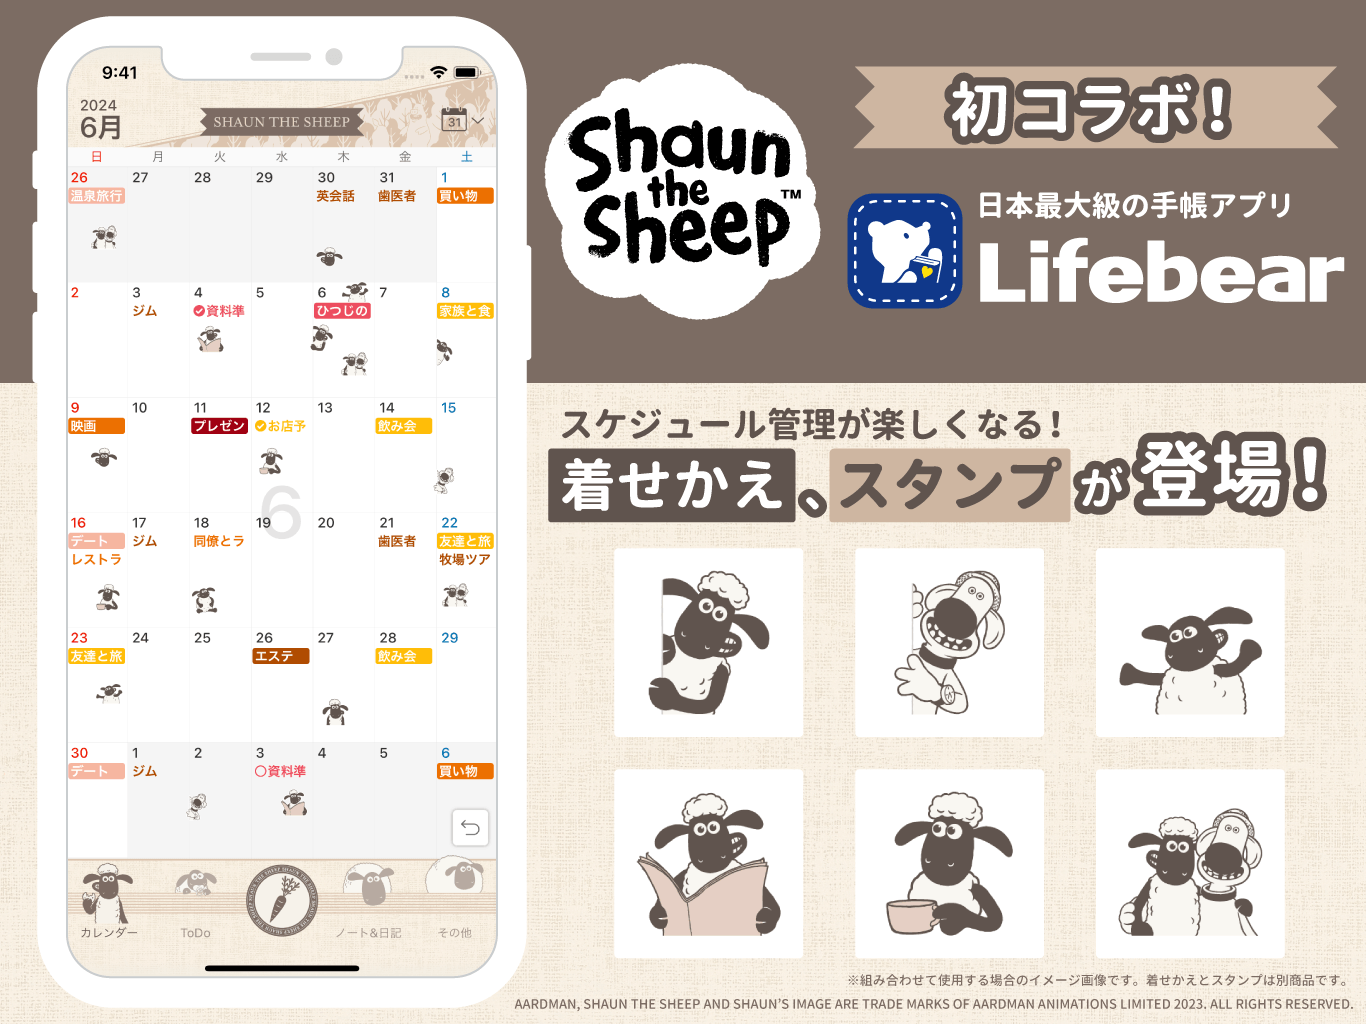 Lifebear_shaun_promotion_FeatureArticle.png